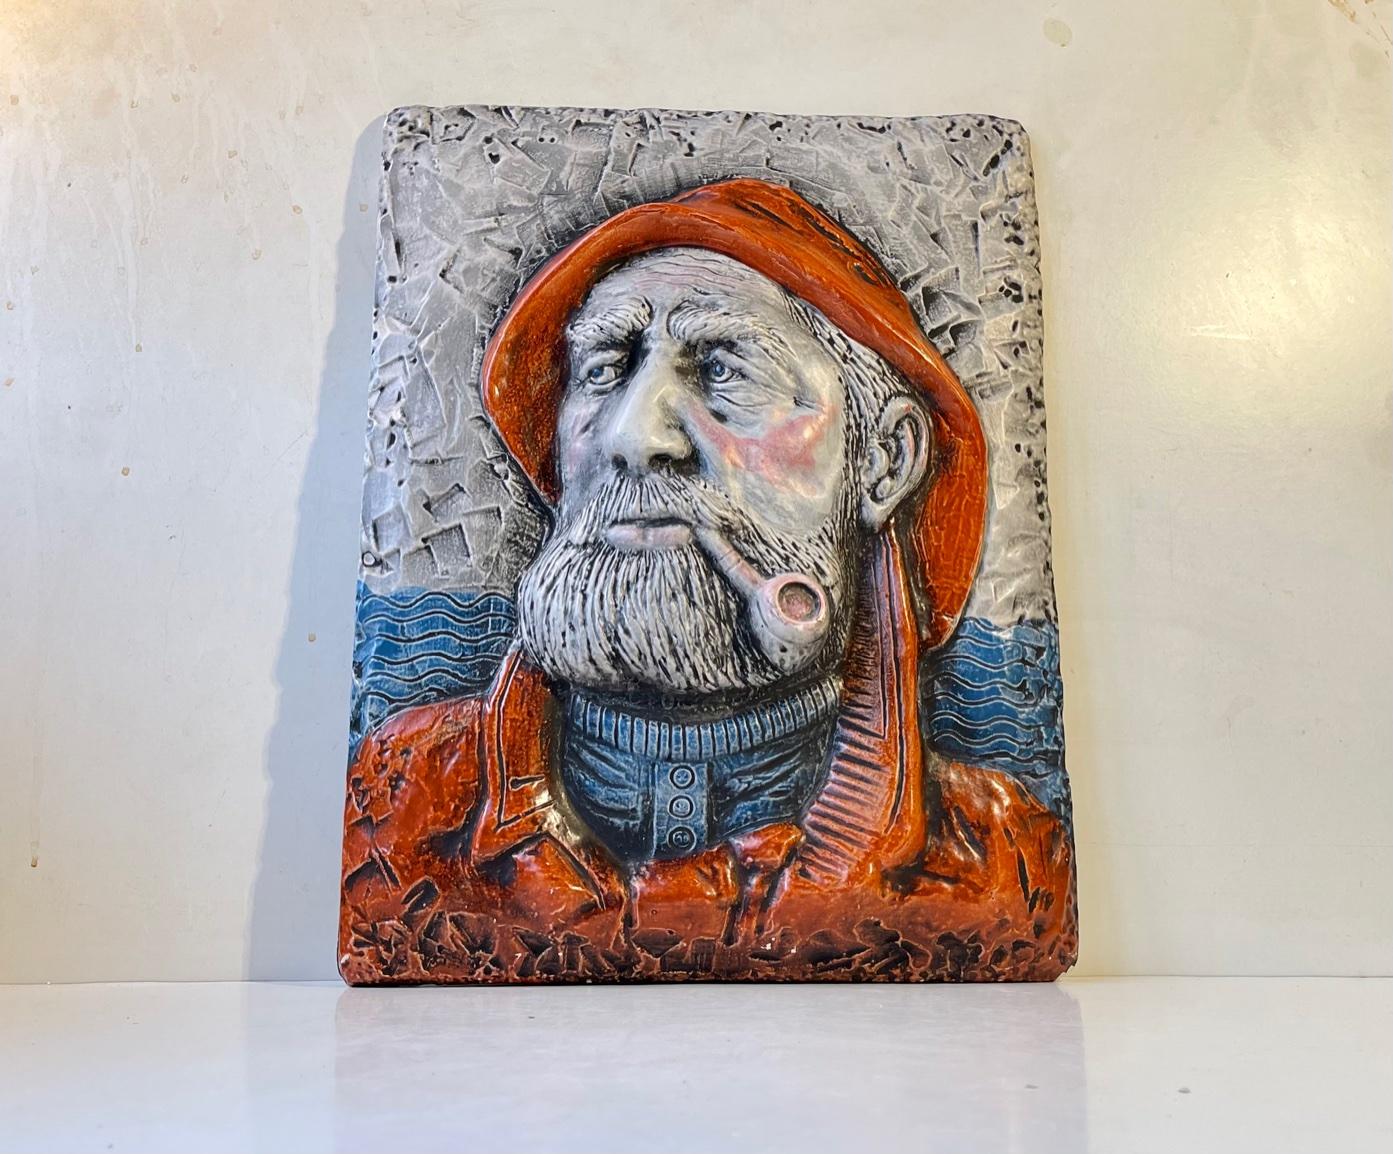 This heavy hand-colored wall relief in cast plaster uzzes masculinity . It depicts a dutch seaman/captain called Dorus Rijkers who rescued over 500 people lost at sea between 1870-1890. He was originally portrayed in an oil painting by the Dutch